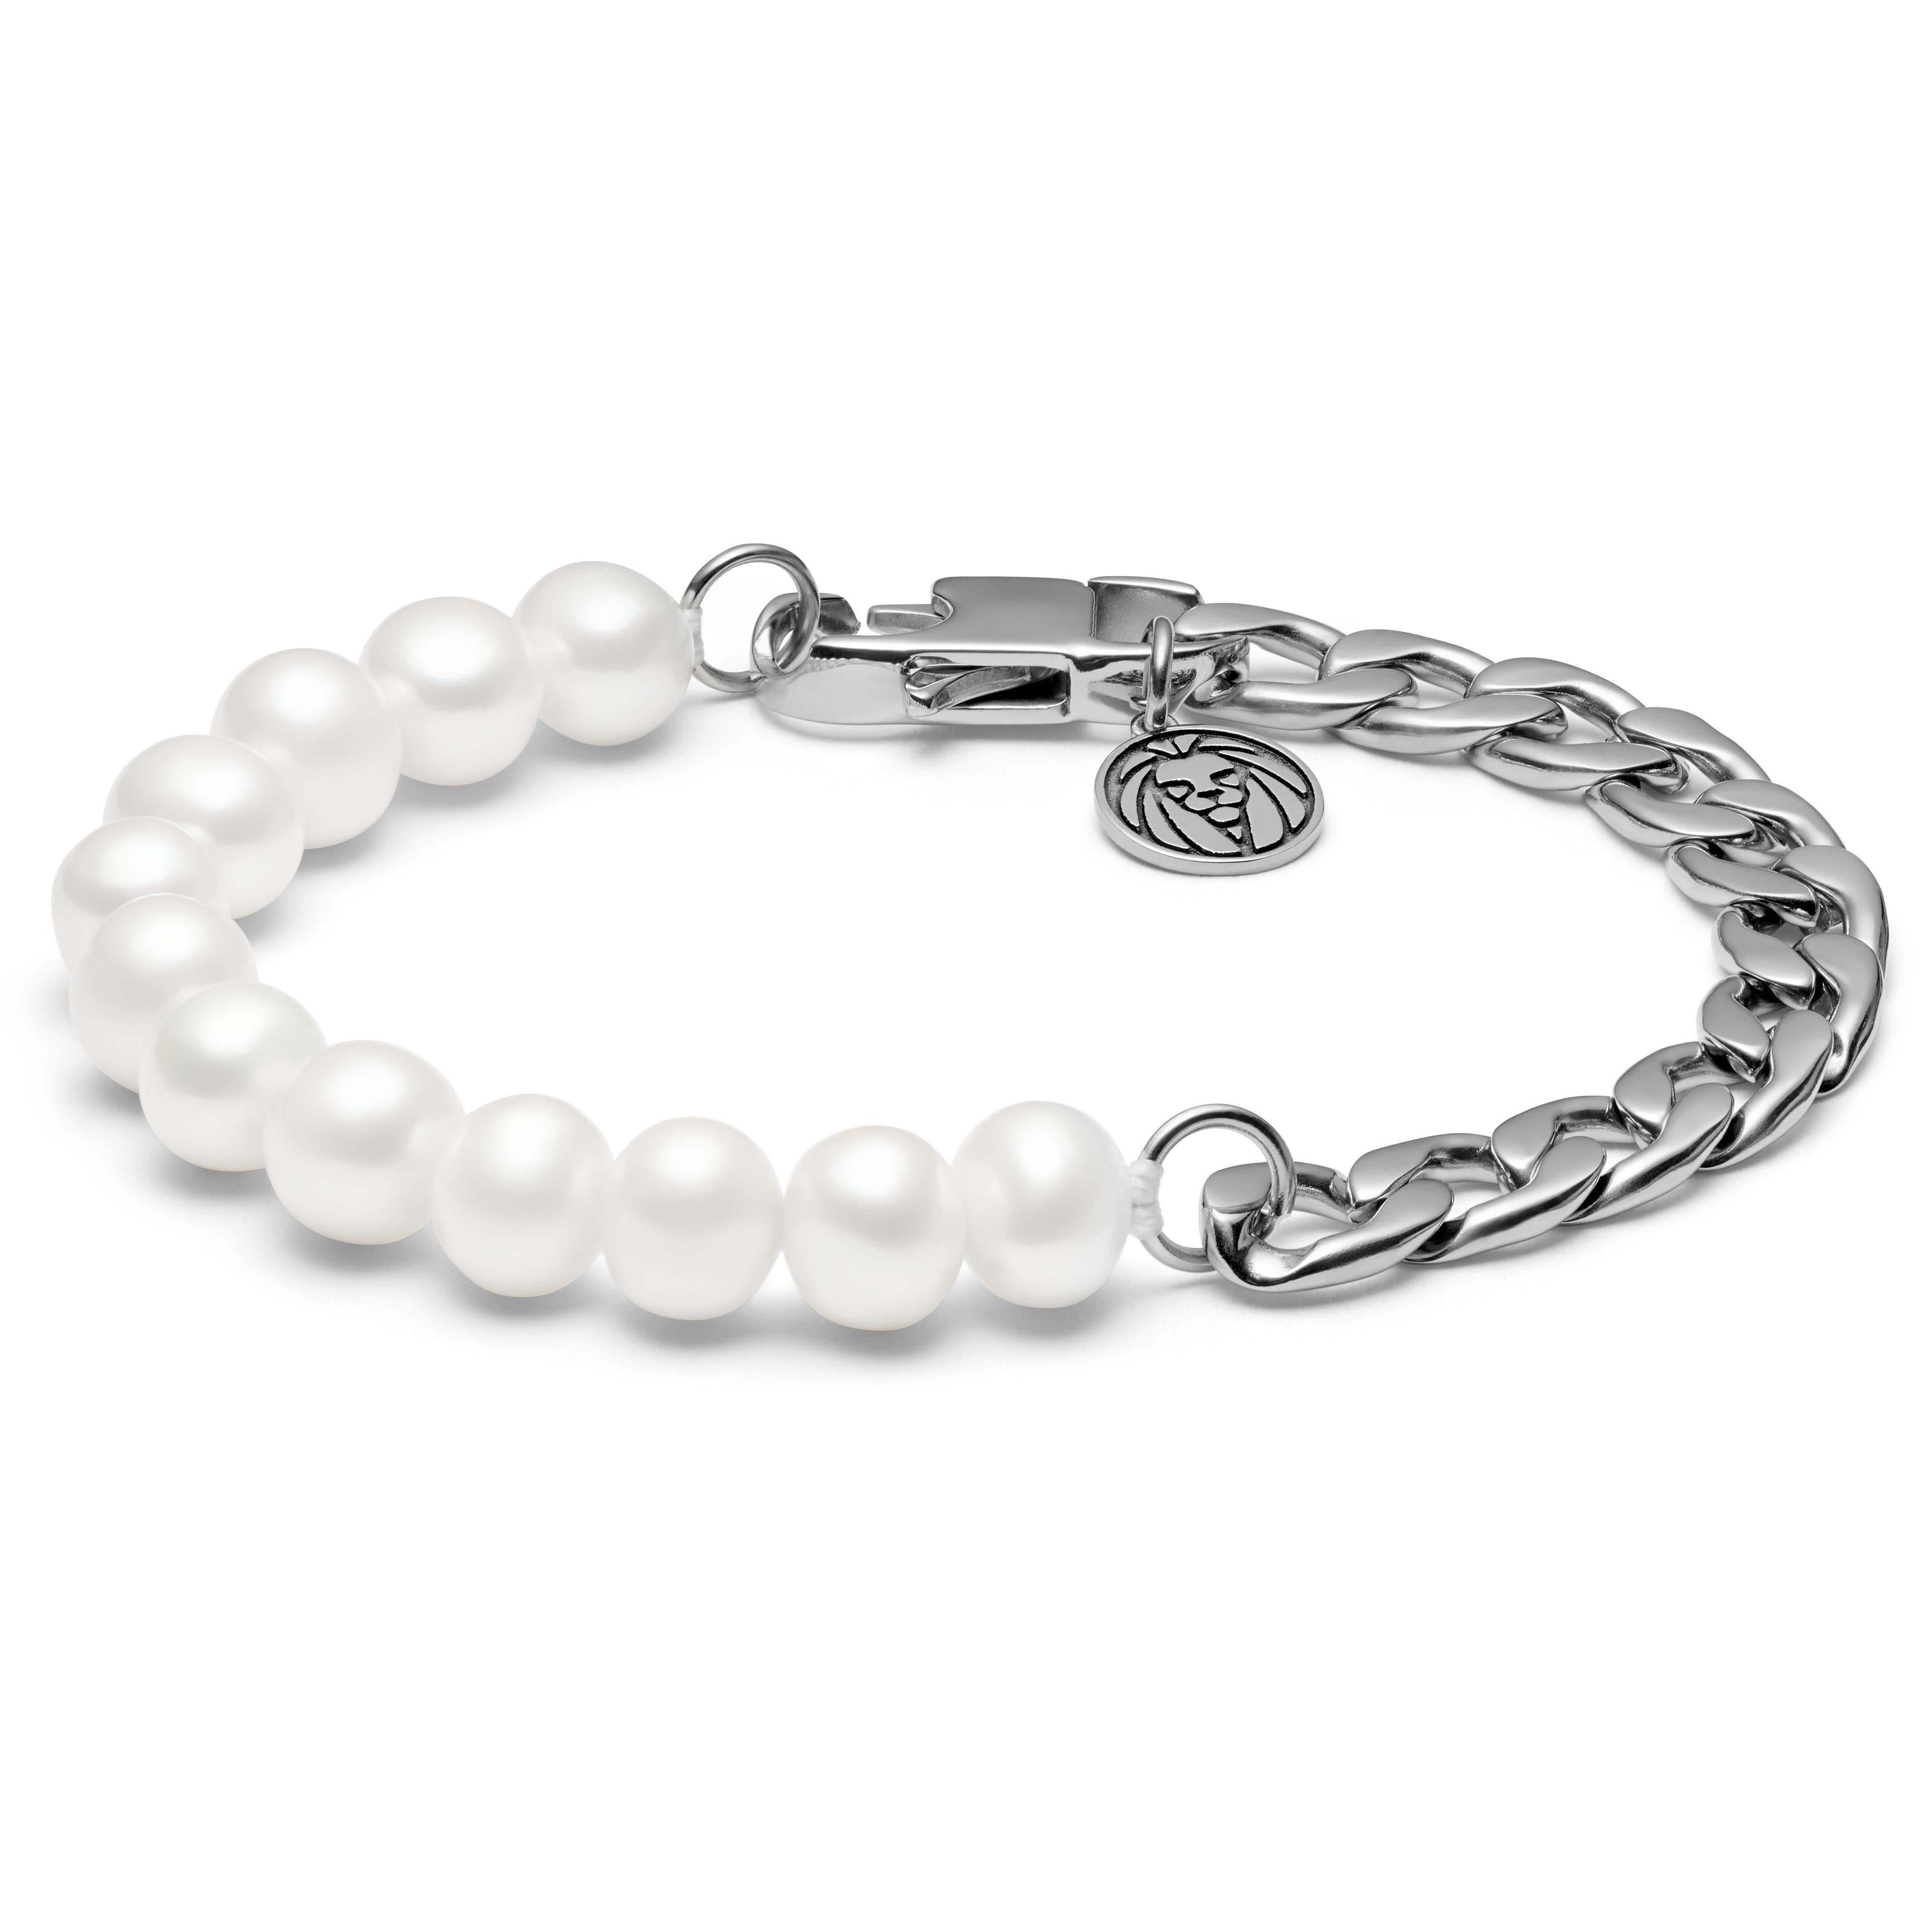 Chad Amager Silver-Tone Curb Chain & Pearl Bracelet